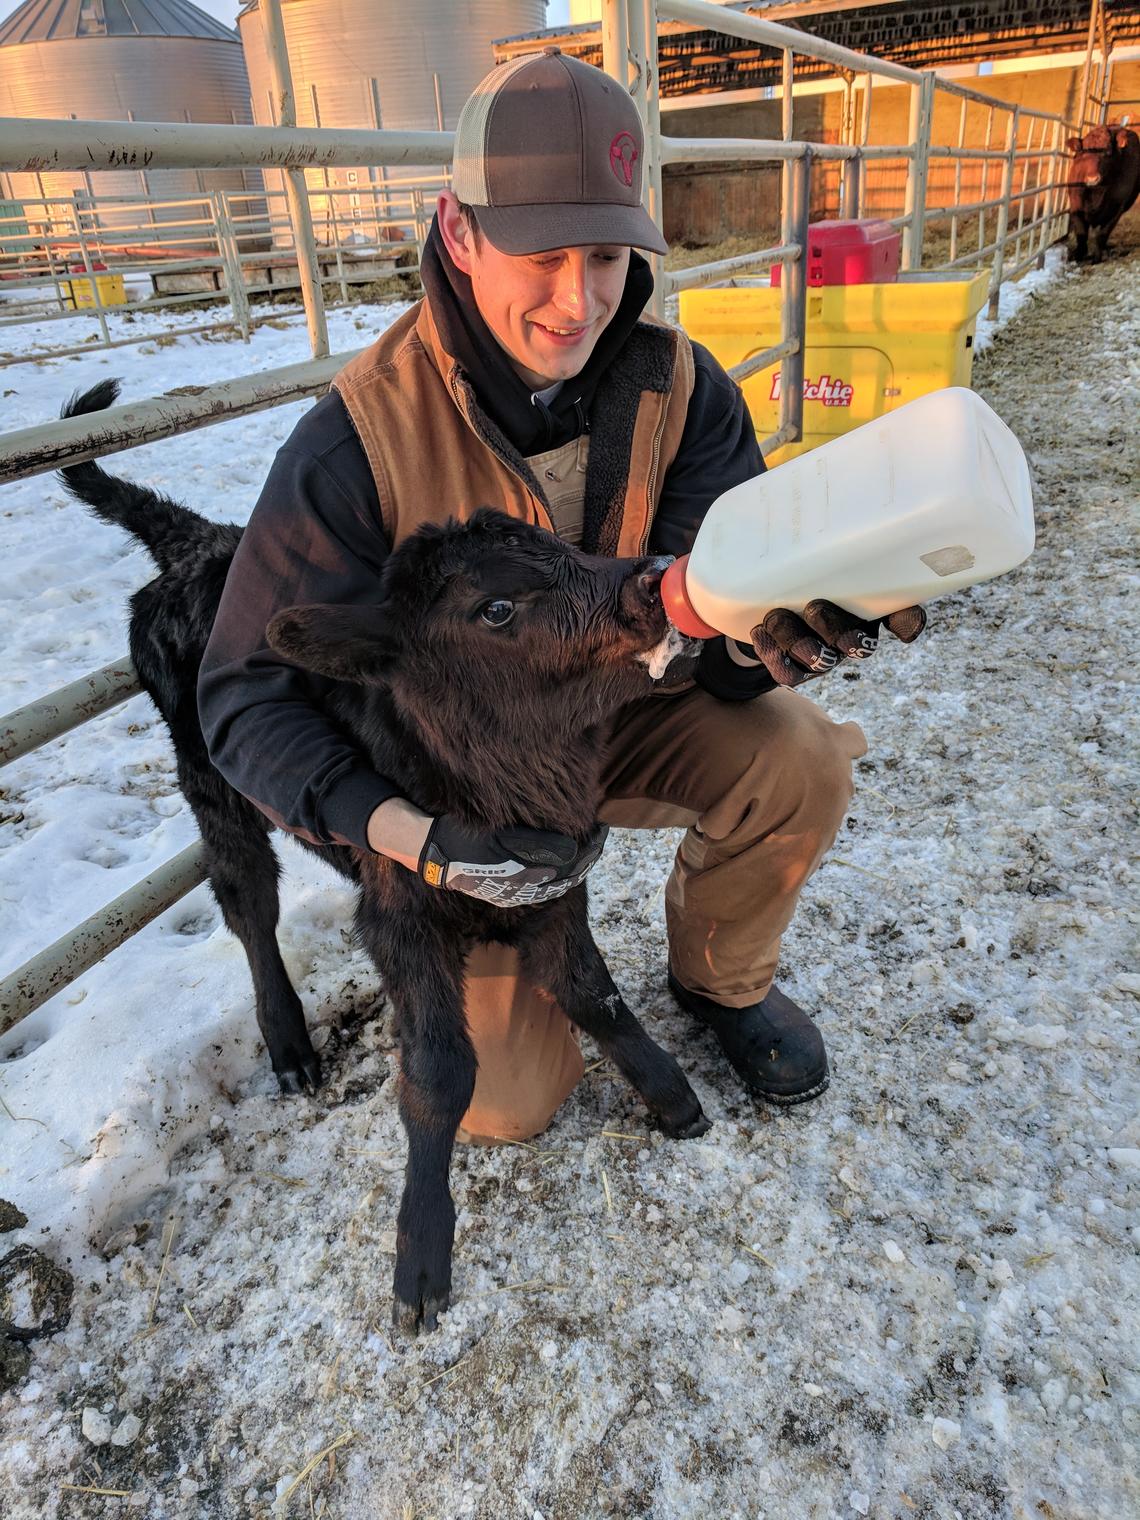 Erik Burow, University of Calgary Veterinary Medicine Class of 2019, credits great mentors for fuelling his interest in cattle health.